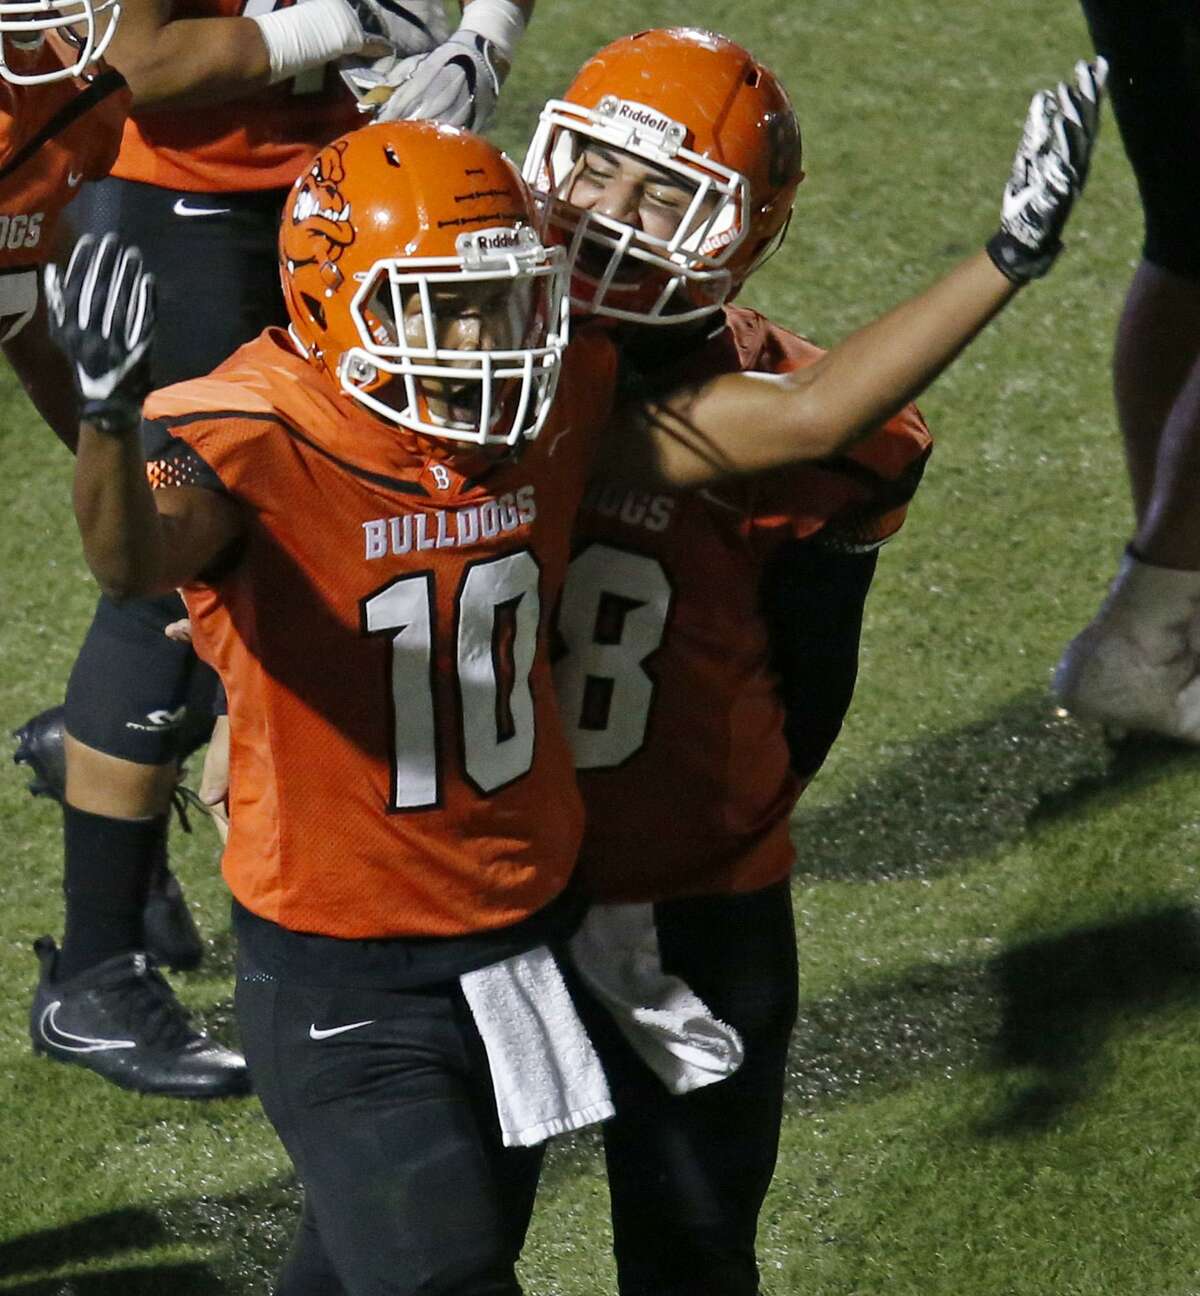 Burbank's Marcus Bolden (left) celebrates with teammate Aaron Trevino after scoring a touchdown against Jefferson during second half action Thursday Sept. 28, 2017 at Alamo Stadium. Burbank won 30-16.